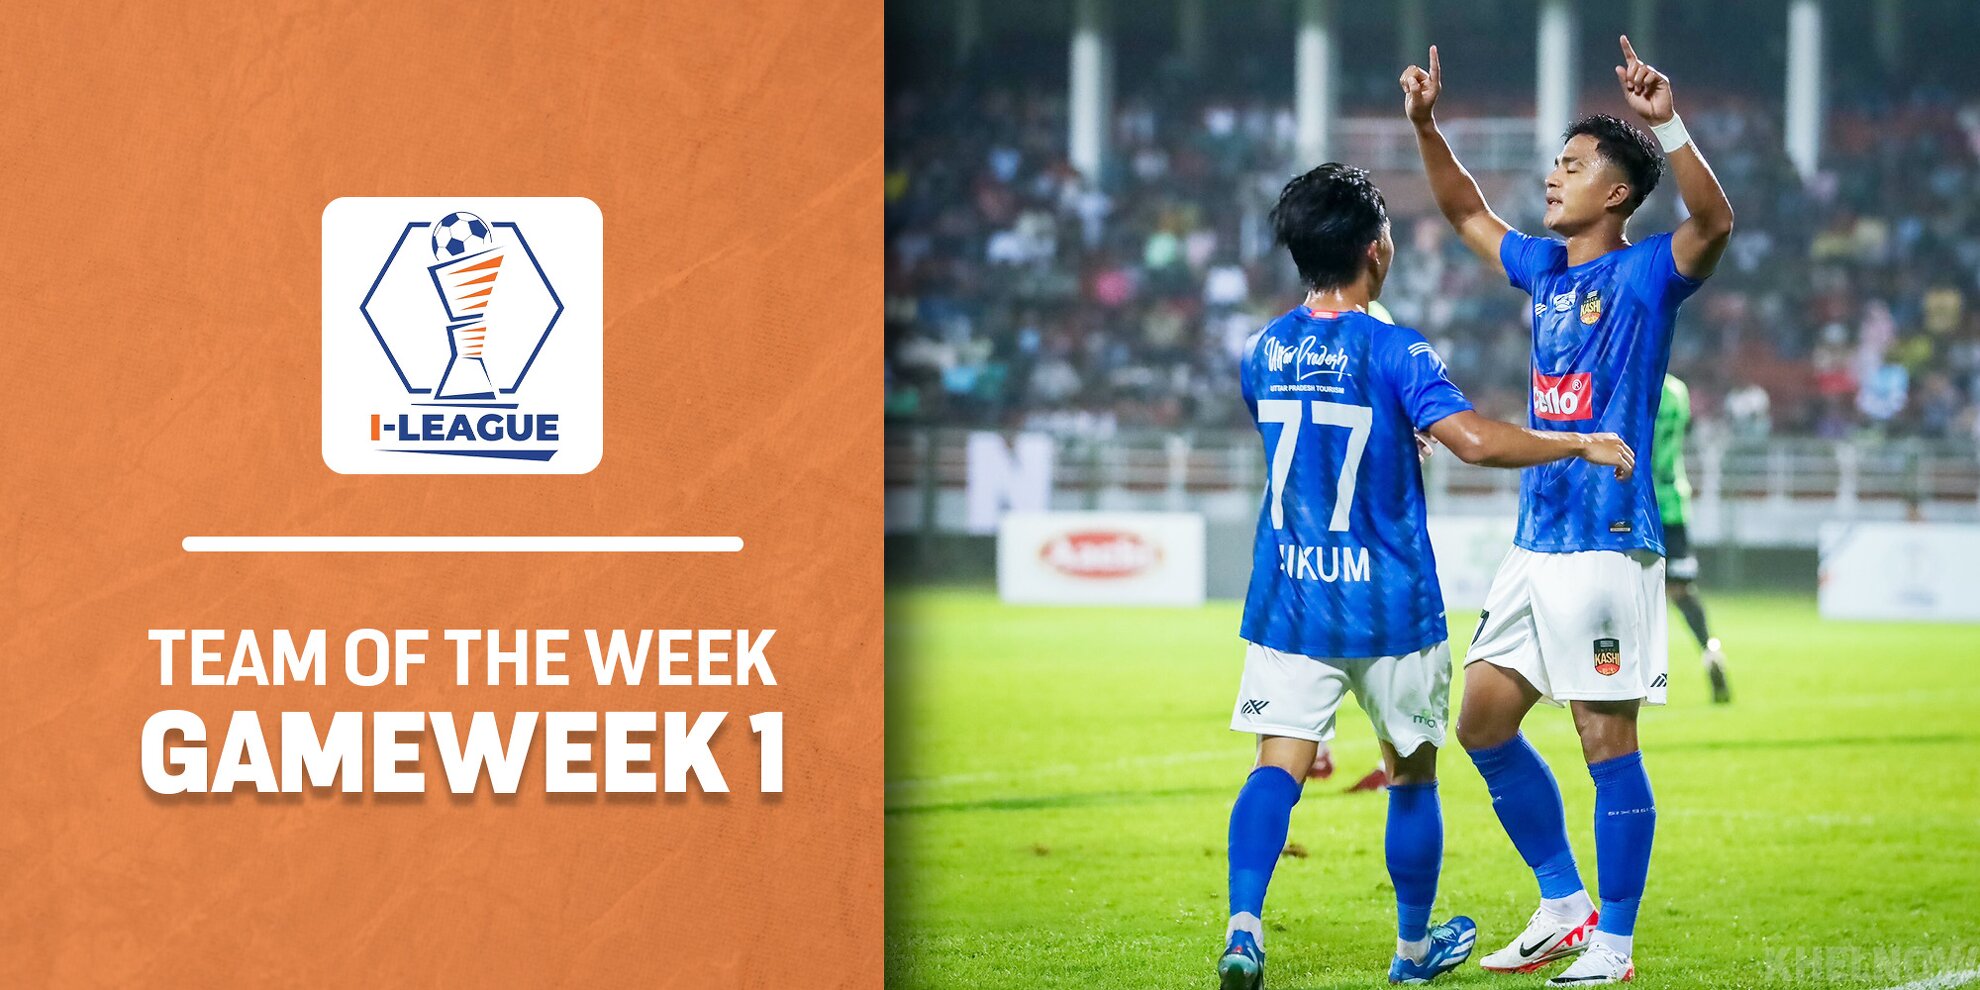 I-League 2023-24: Team of the Week for GW 1